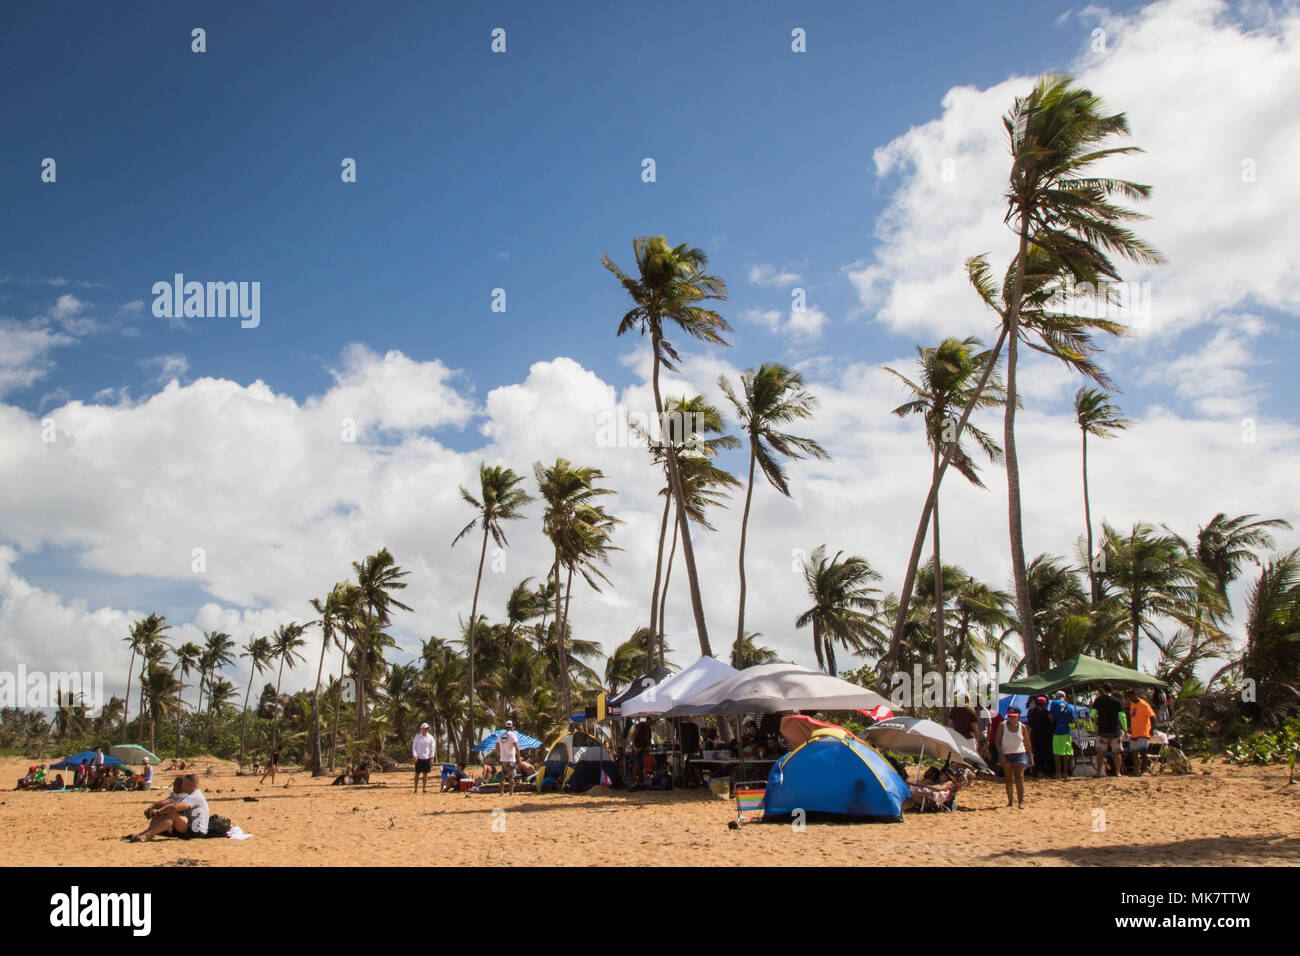 SAN JUAN, Puerto Rico — Families and hosts set up tents during the La Comprita charitable surf competition in Aviones, Puerto Rico, Nov. 11, 2017. The competition is hosted by Agua Salá Ministries, founded by Yossua Lugo over six years ago. Agua Salá is a religious outreach program focusing on helping improve Puerto Rican communities through donations and charitable works. Members of the ministry teach regular surf lessons to children, and host the monthly competition. Proceeds from the competition’s entrance fees and merchandise sales go directly to food and clothing donations. Each month a d Stock Photo